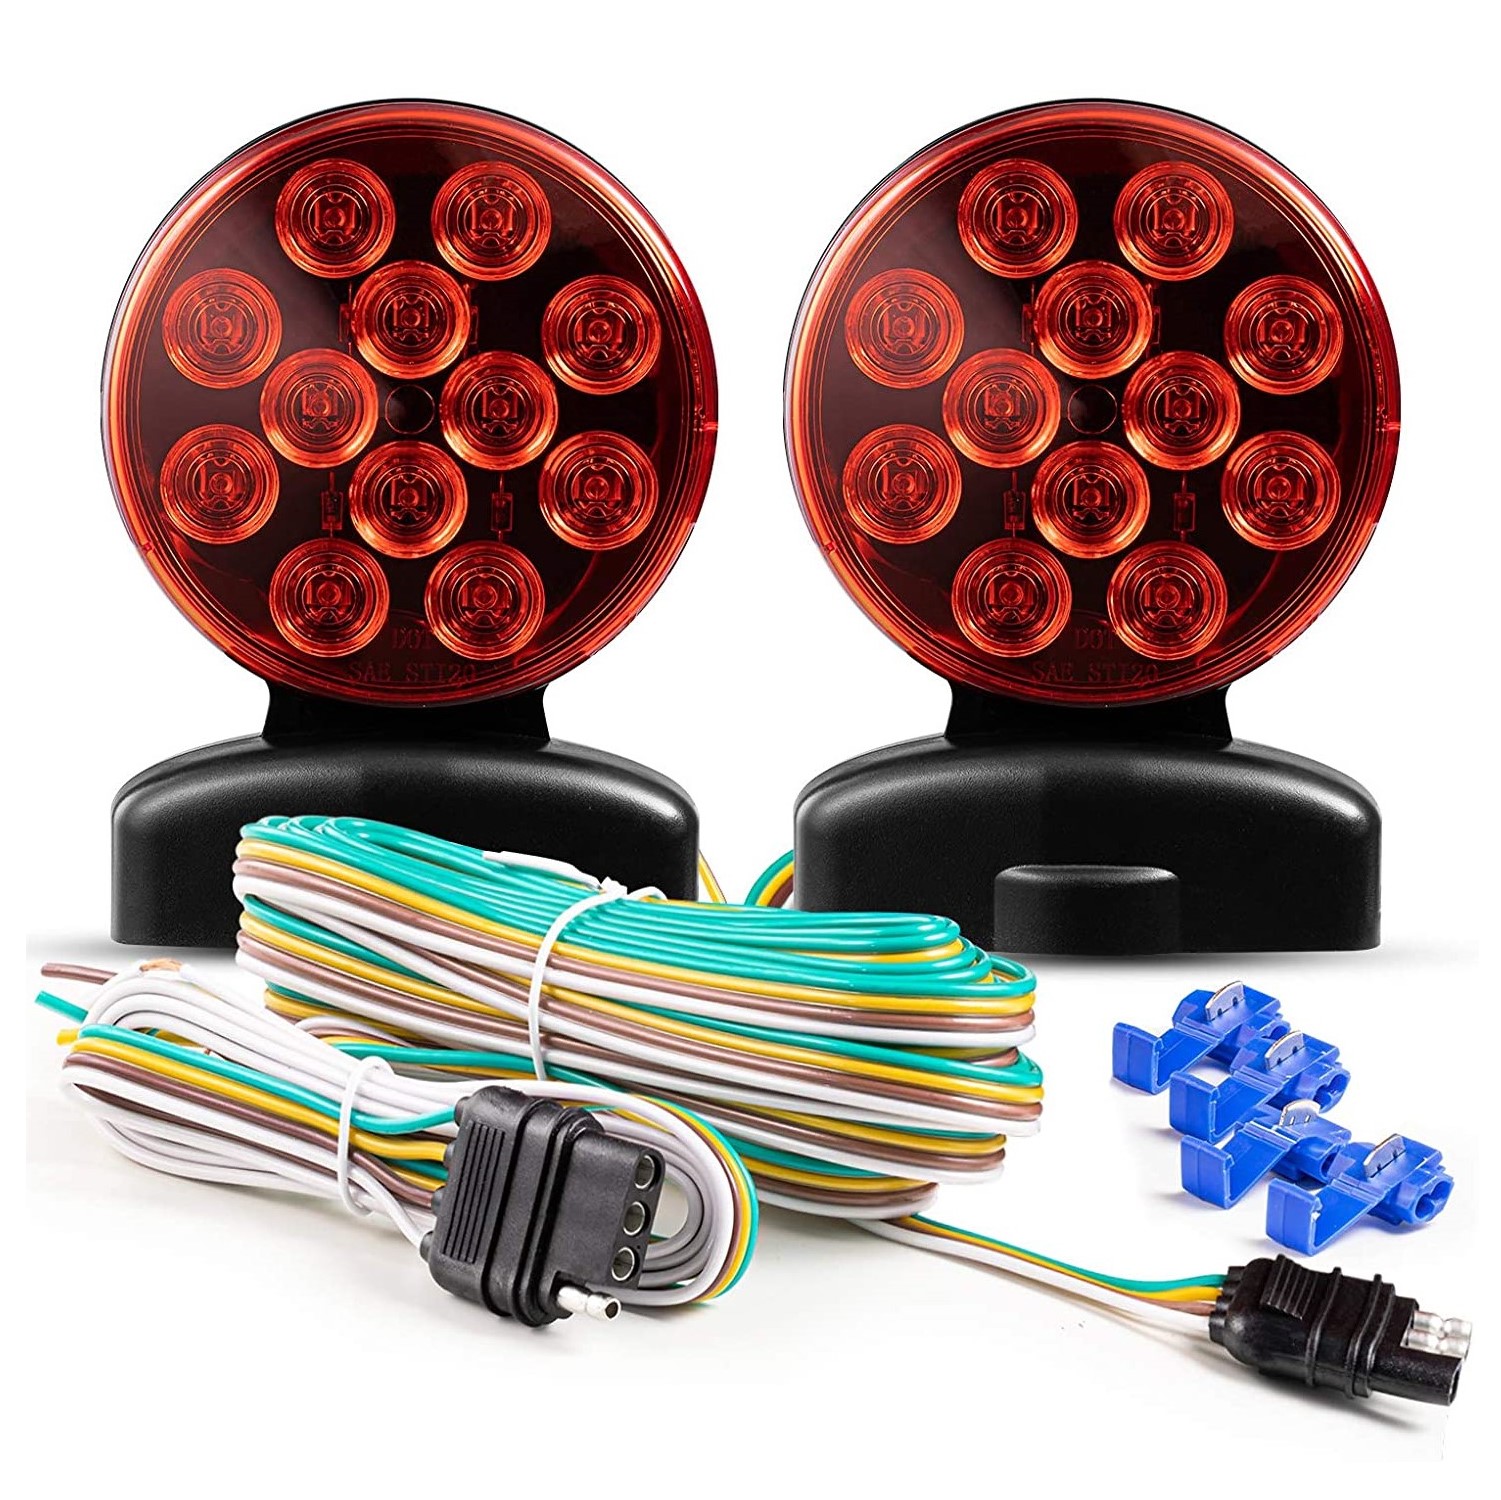 101018W 12V LED Magnetic Towing Light Kit for Boat Trailer RV Truck Featured Image